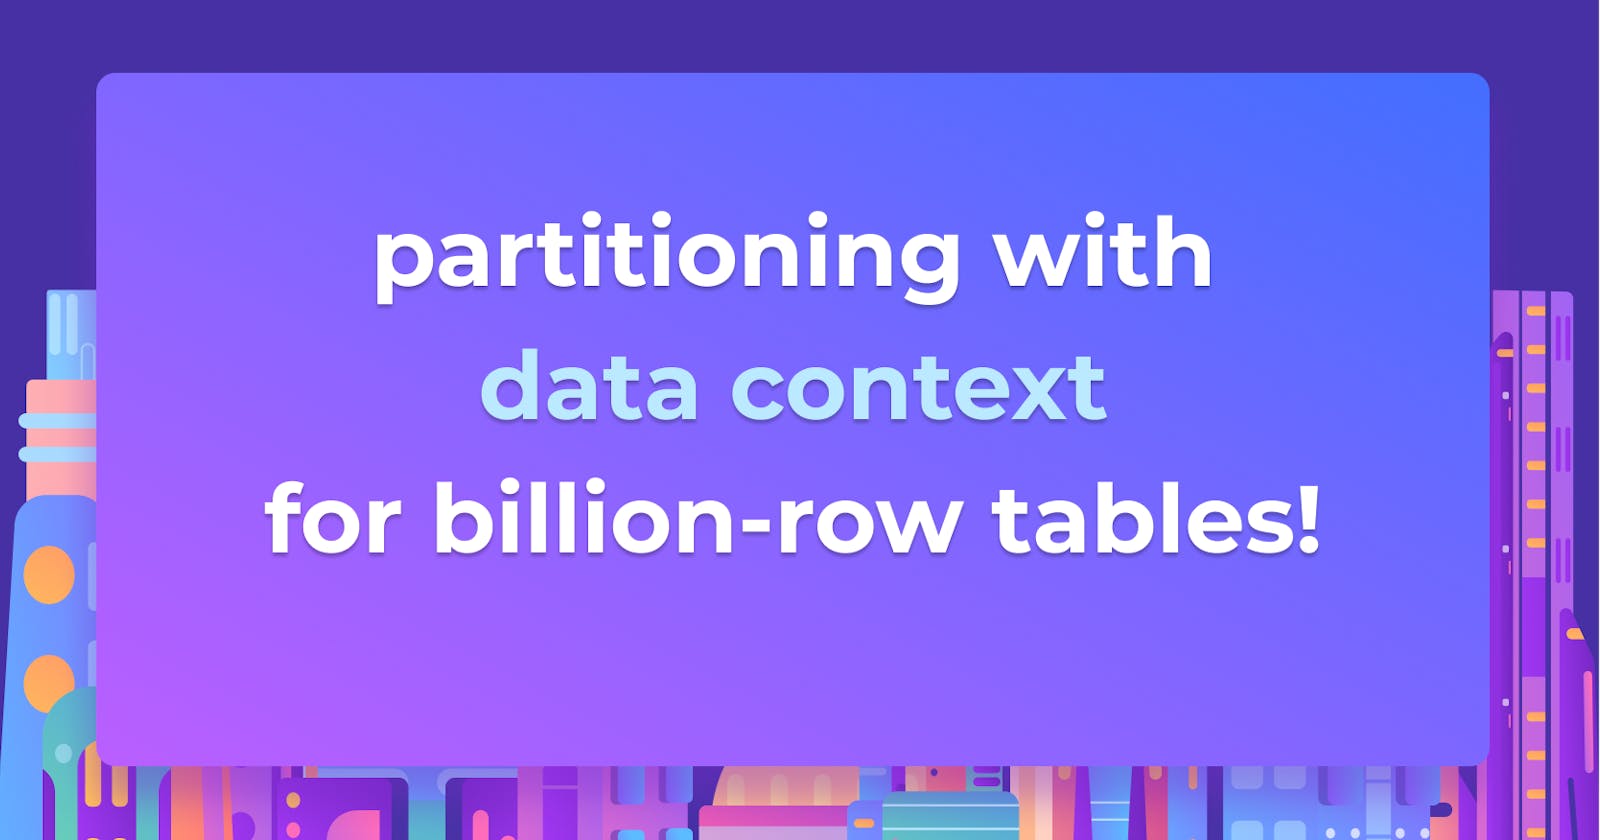 Partitioning a billion-row table of soccer data using data context